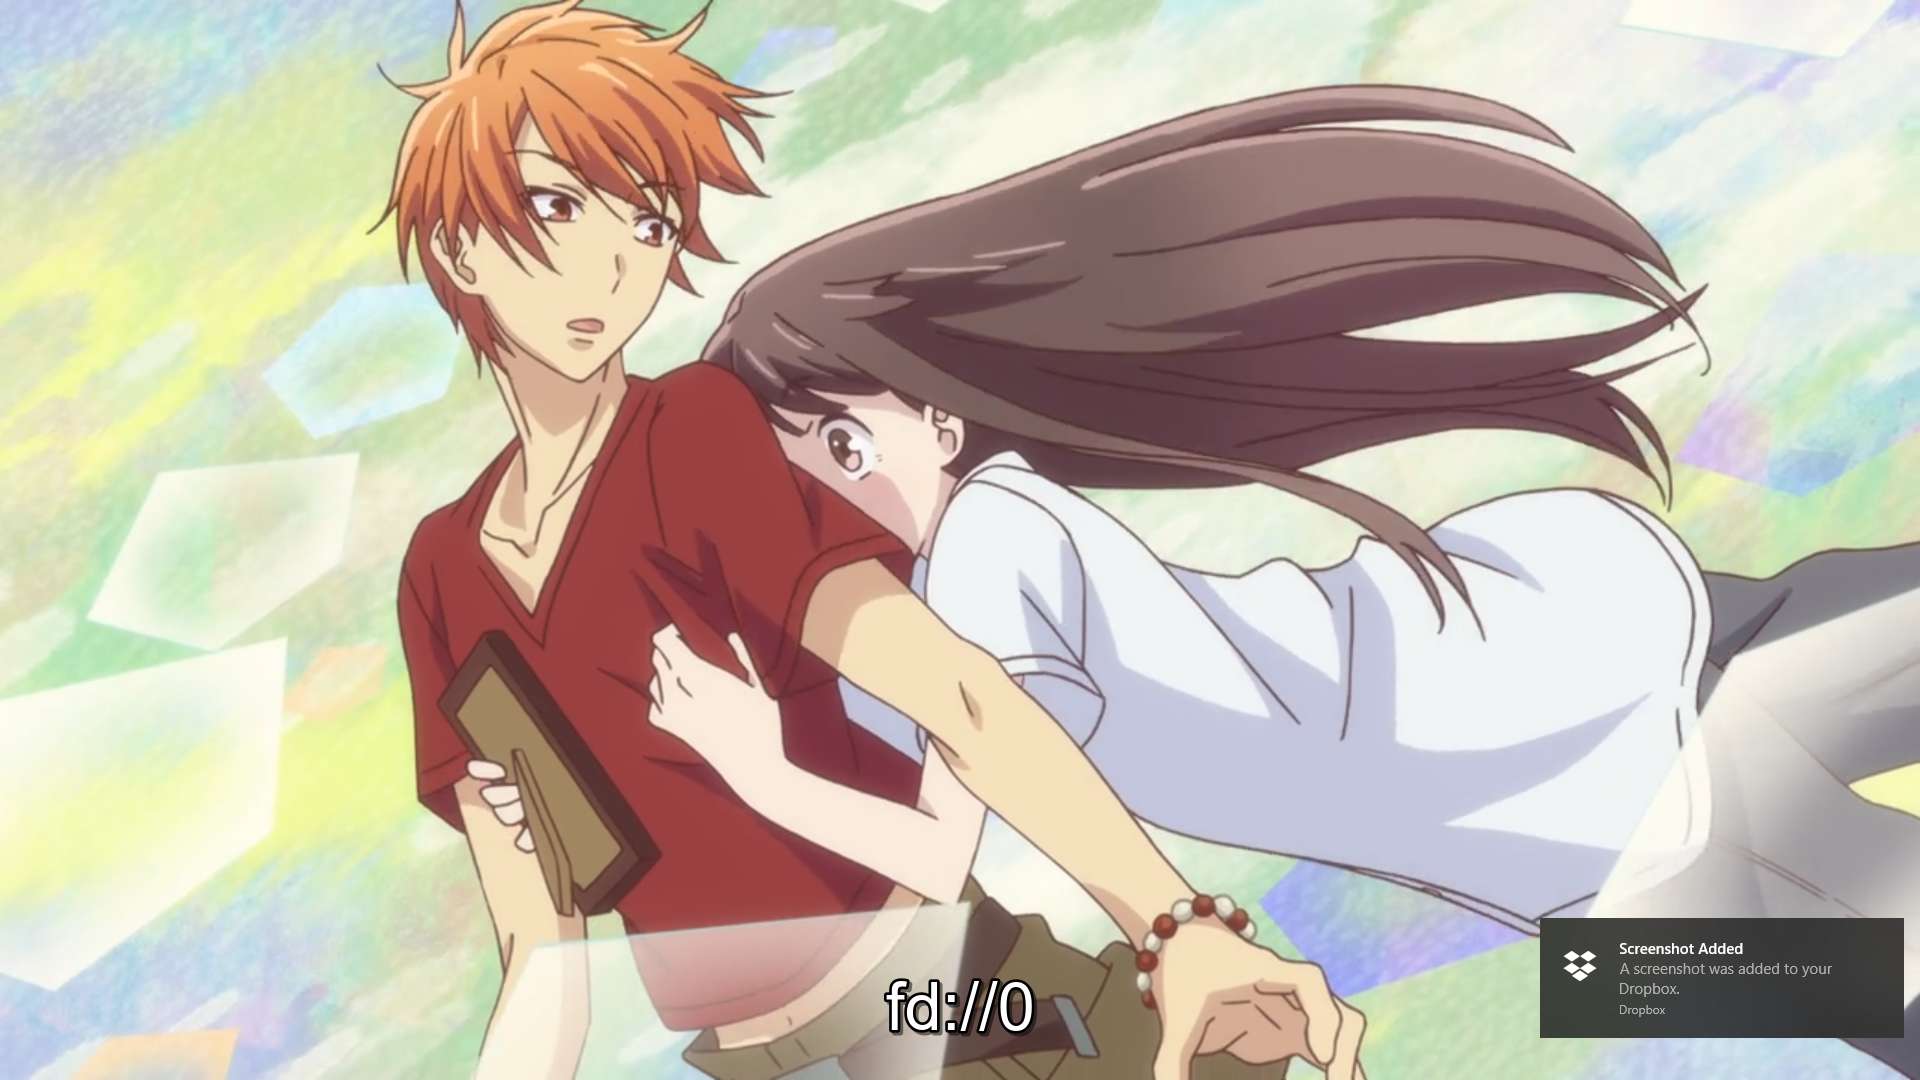 See You After School – Fruits Basket (2019) Episode 1 Review